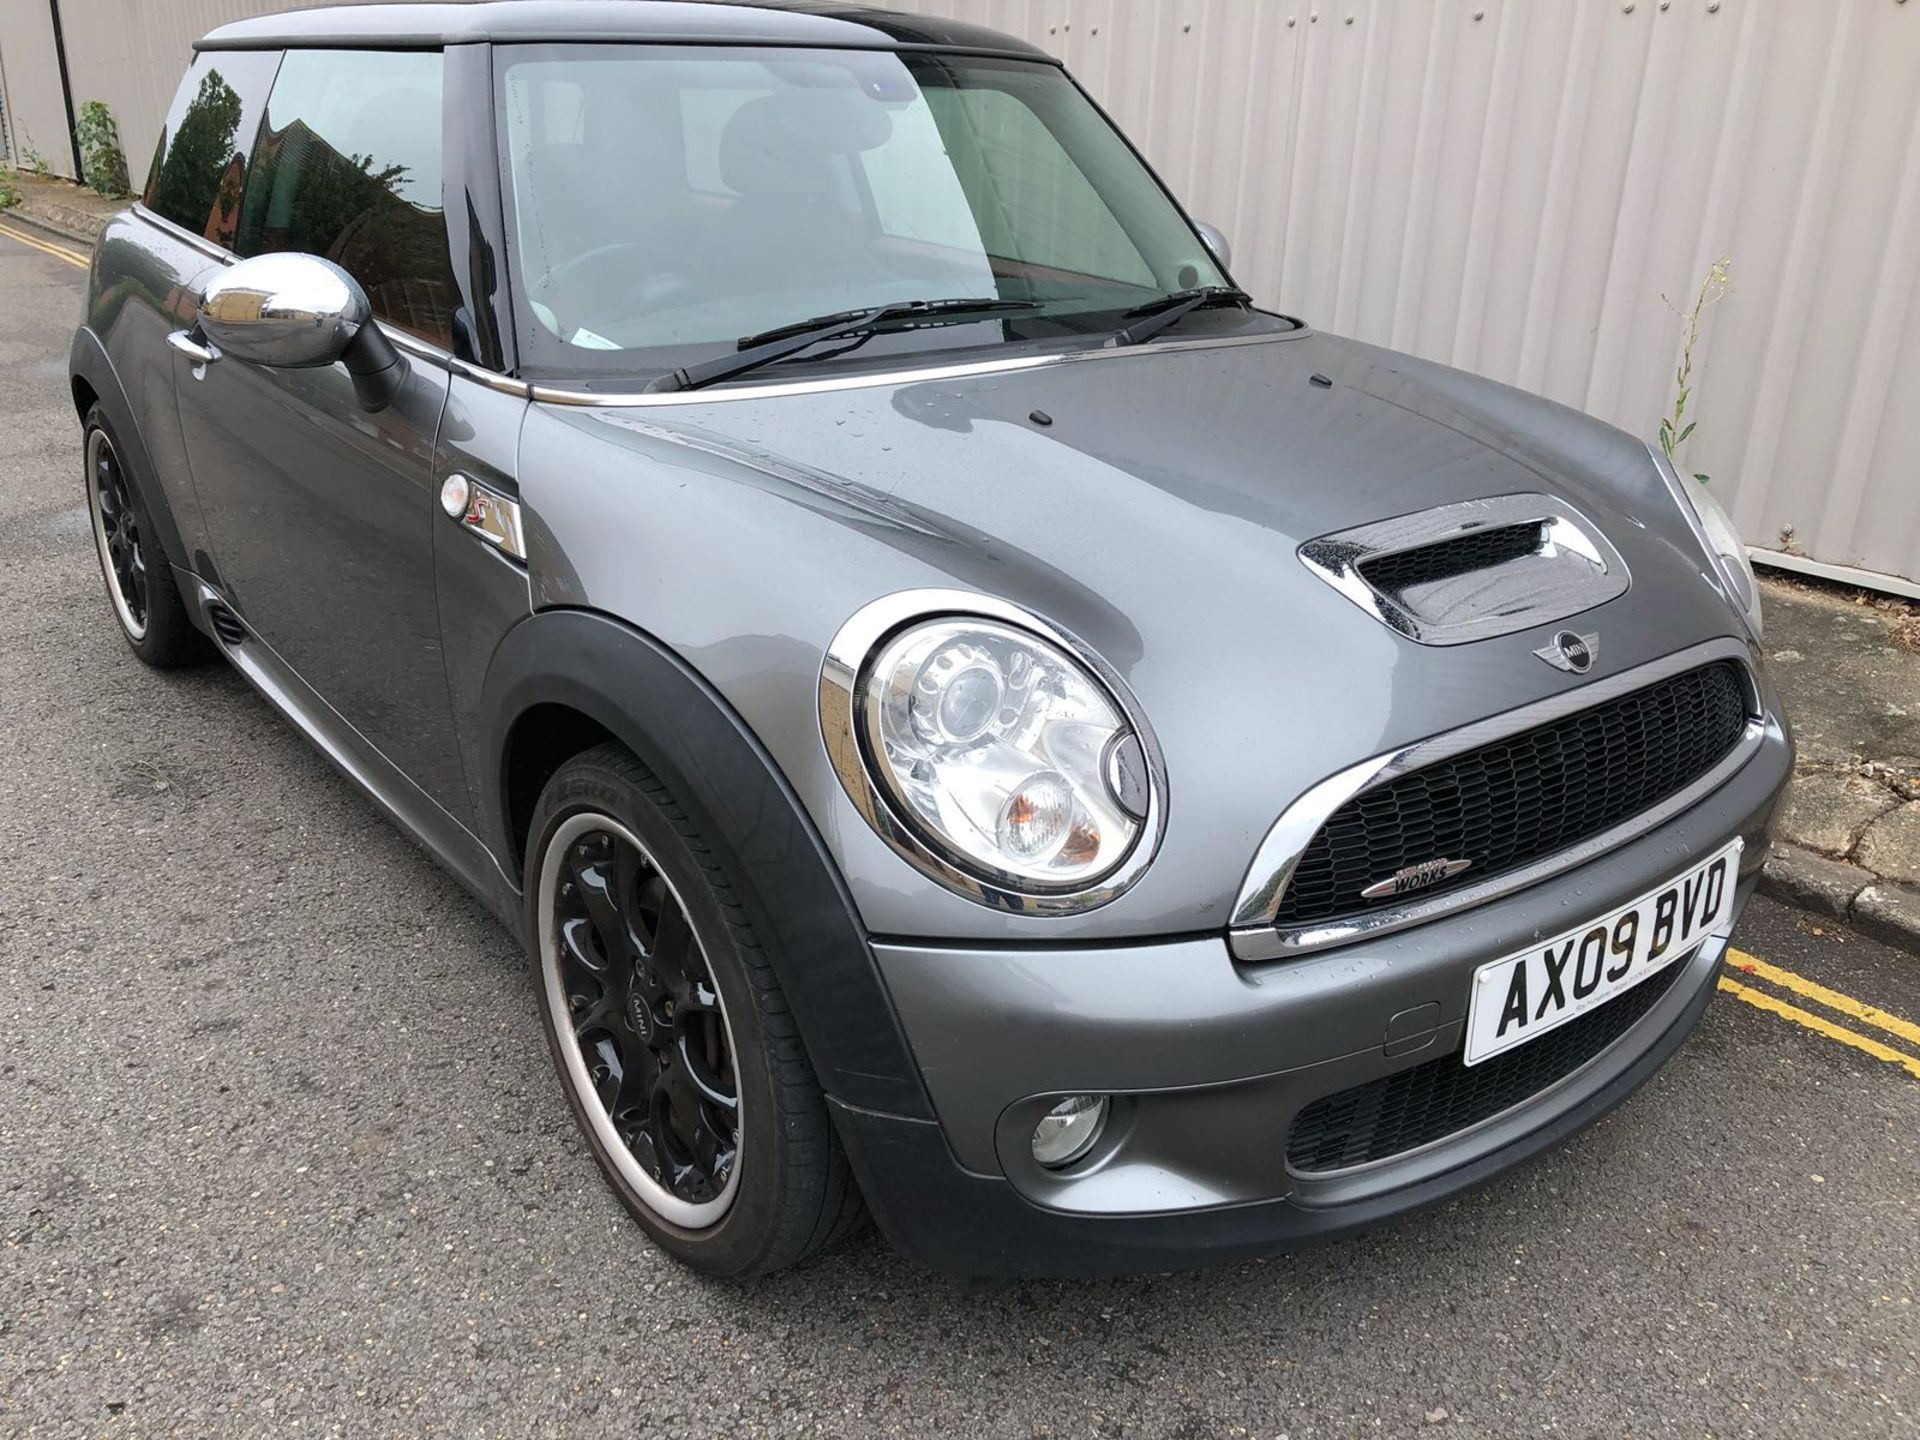 MINI COOPER S JOHN WORKS. 2009/09. 79,000 miles. Full history with 9 stamps in the book. - Bild 2 aus 19